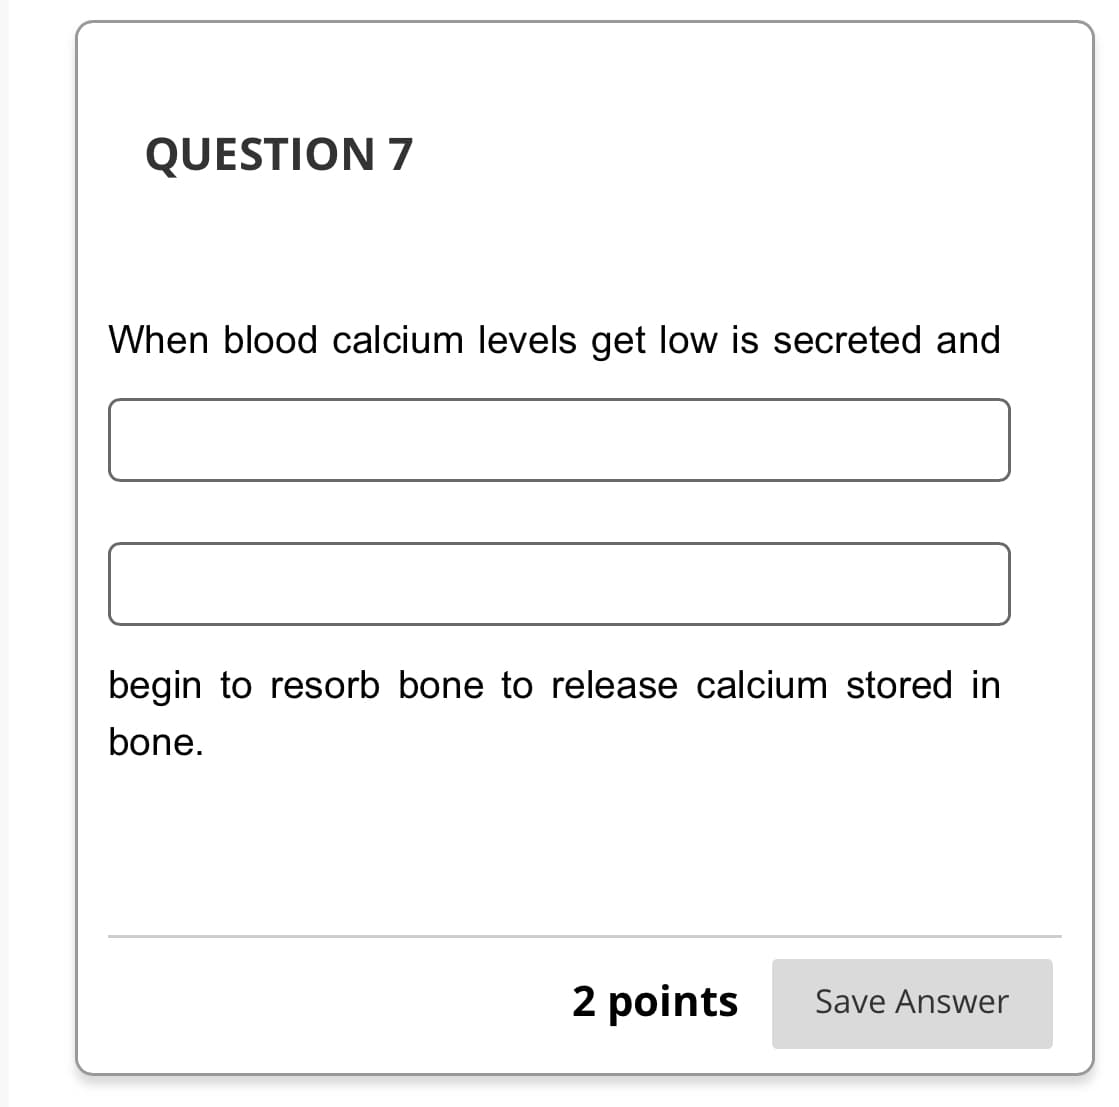 QUESTION 7
When blood calcium levels get low is secreted and
begin to resorb bone to release calcium stored in
bone.
2 points Save Answer